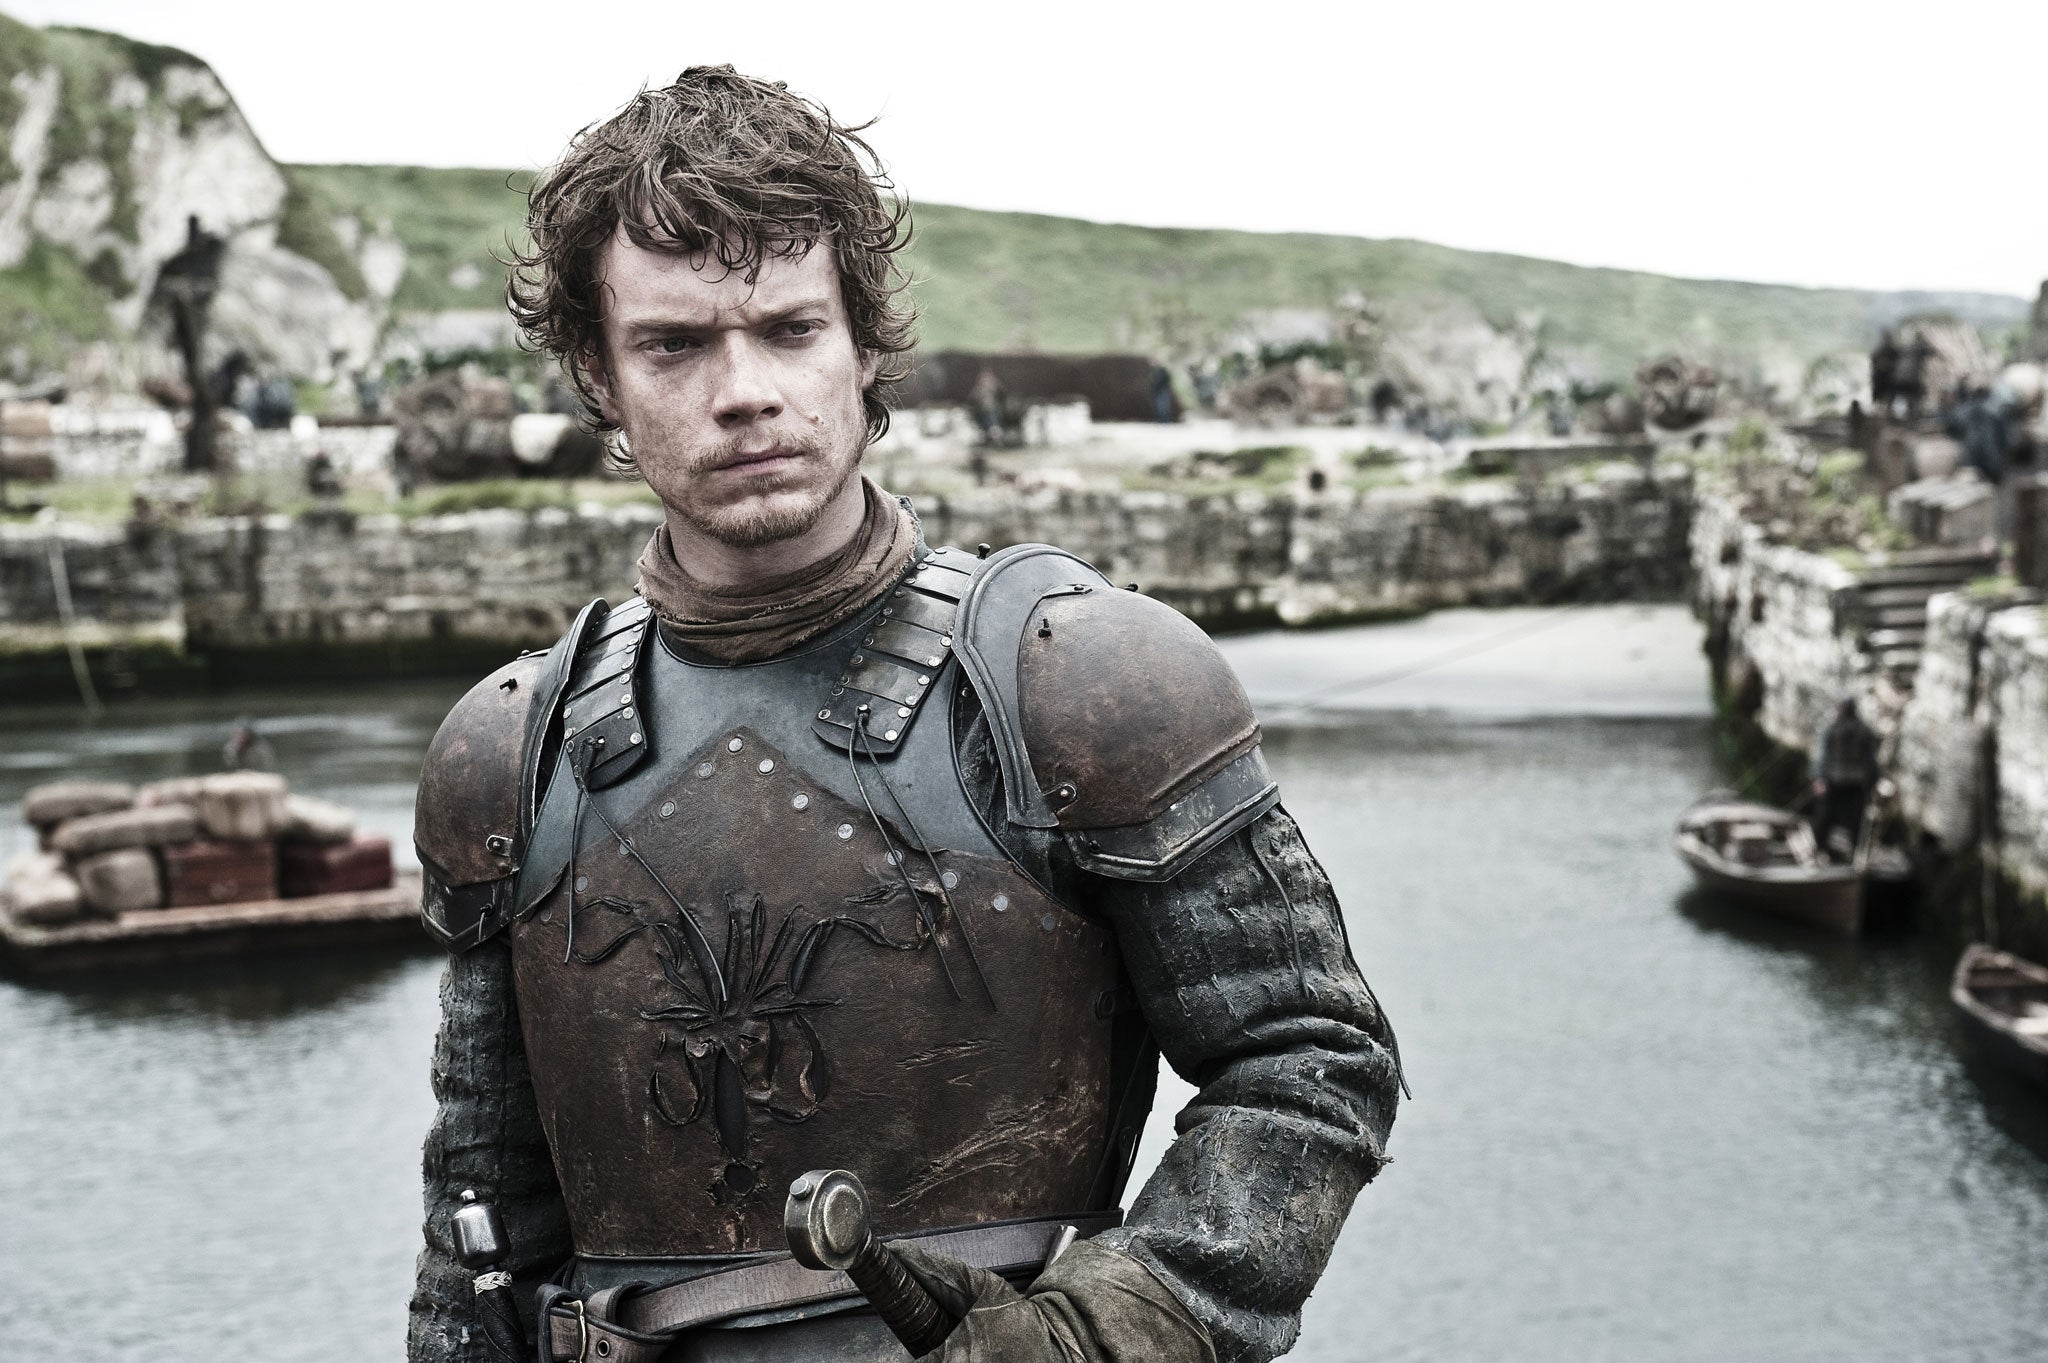 Theon, Tyrion, Bran, Khaleesi, Daenerys and Sansa were among the names to boys and girls born in 2014